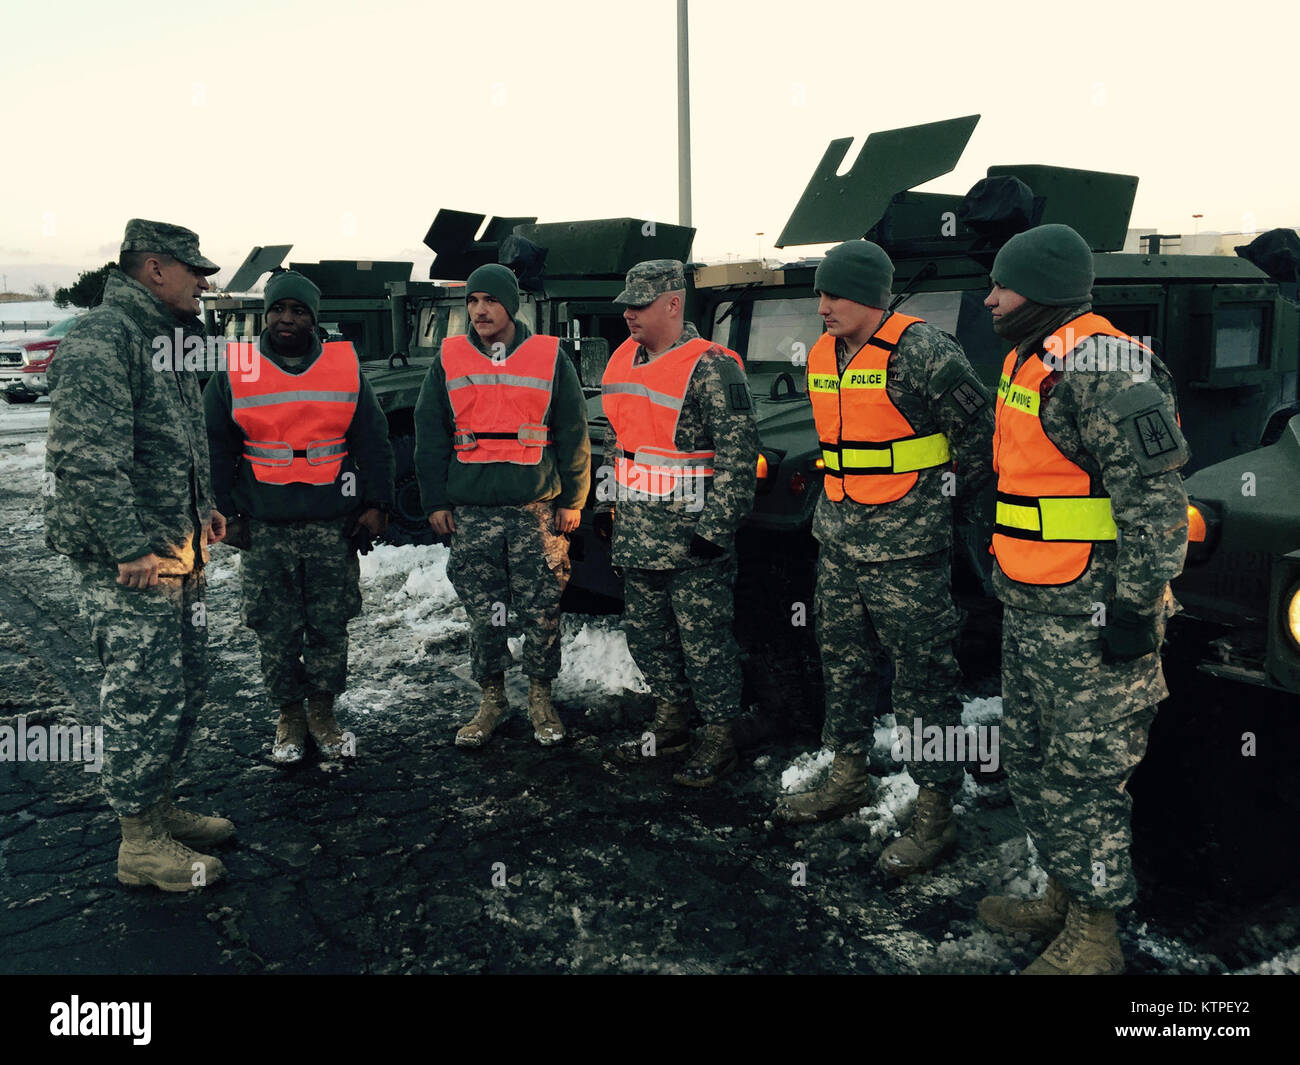 Major General Patrick Murphy, the Adjutant General of New York speaks to Army National Guard Soldiers preparing to go on a traffic control point mission on Friday, Jan. 9, 2015 as the New York National Guard assisted the New York State Thruway Authority in closing portions of the road in Buffalo due to poor weather conditions. (U.S. Army National Guard photo by Major Mark Frank/Released) Stock Photo